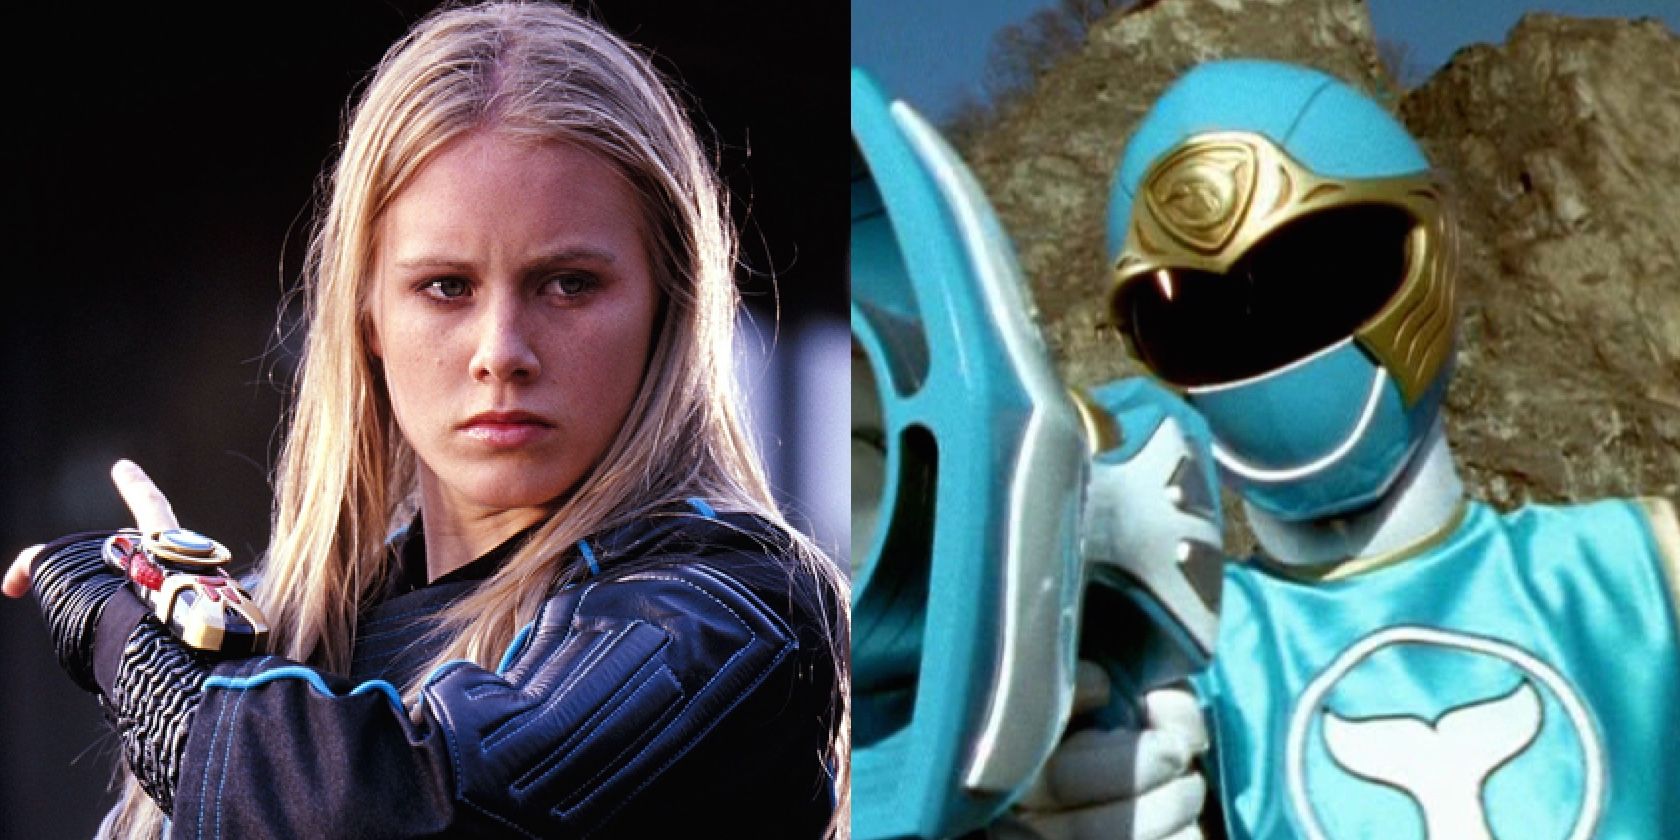 A split image features Tori out of and in her Power Rangers Ninja Storm gear